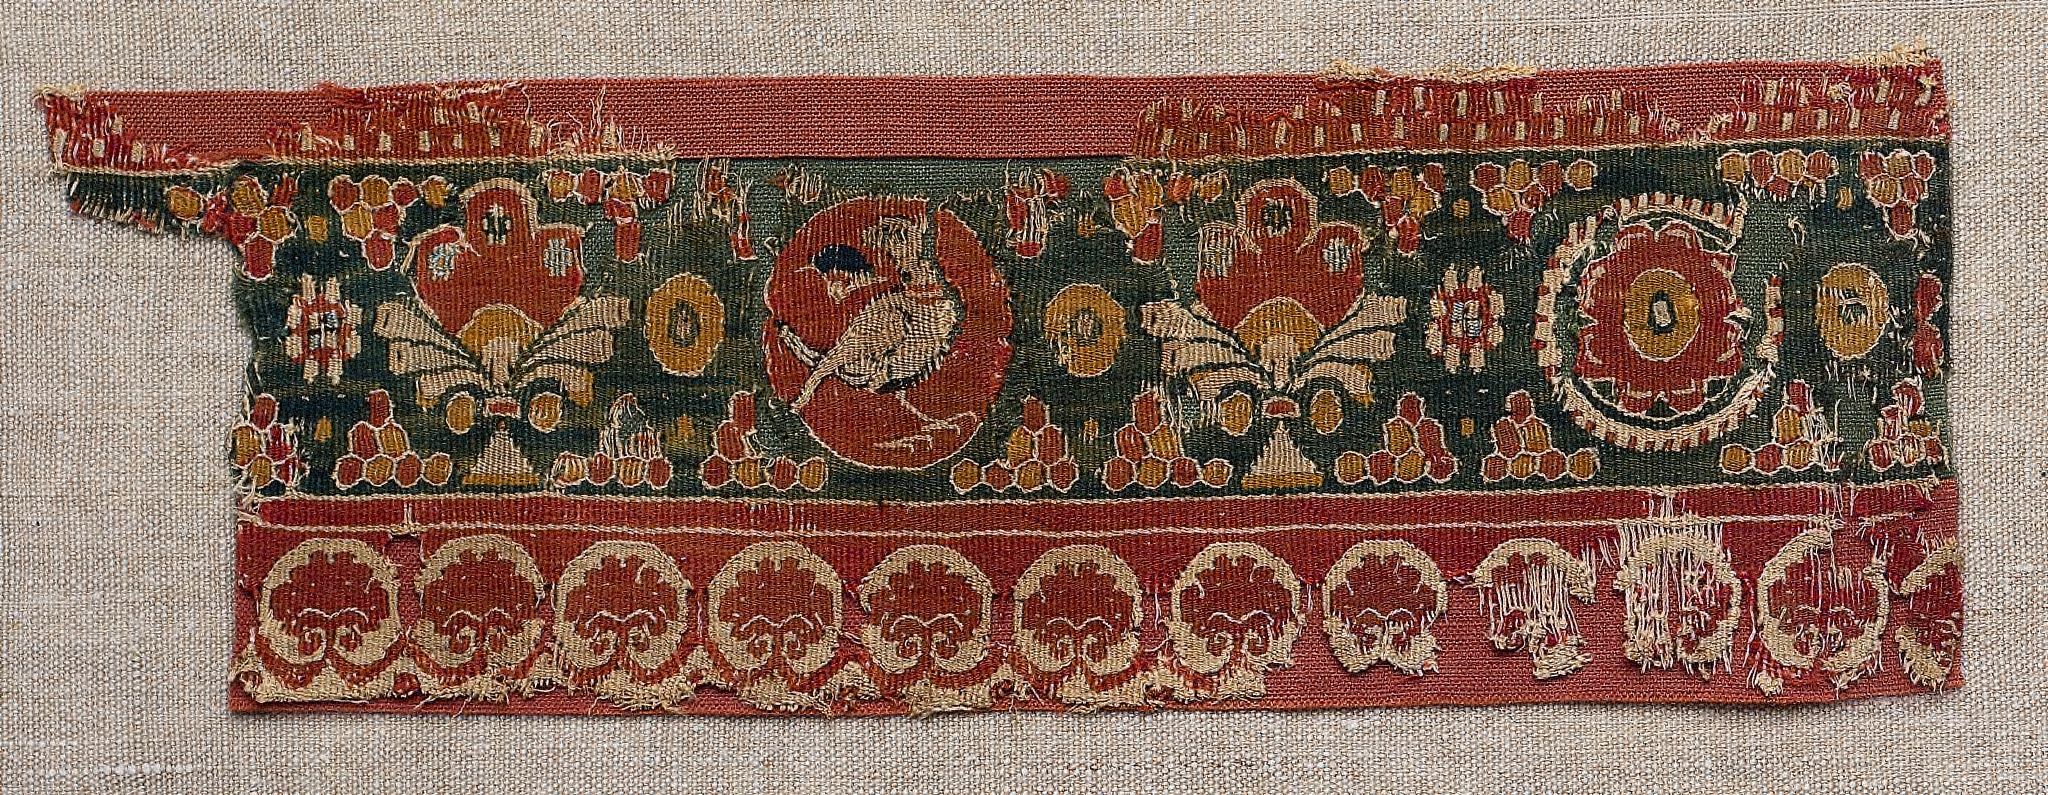 Decorated Band from a Tunic or Curtain